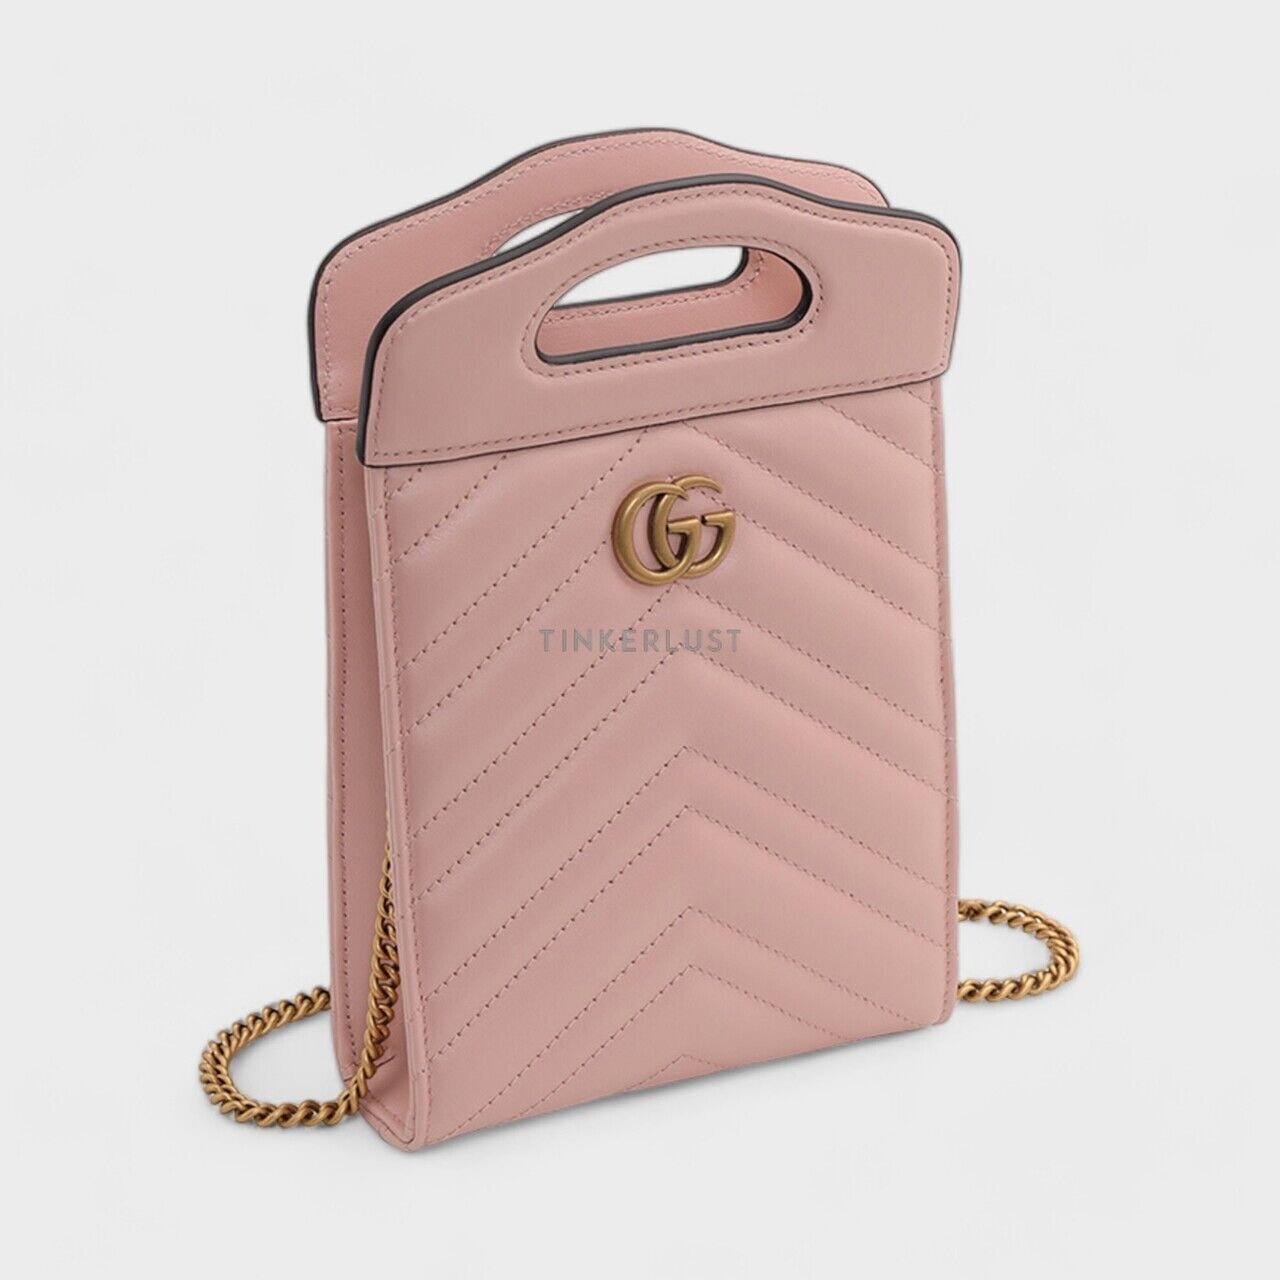 Gucci Mini GG Marmont Top Handle  in Light Pink with Chain Strap Square Sling Bag